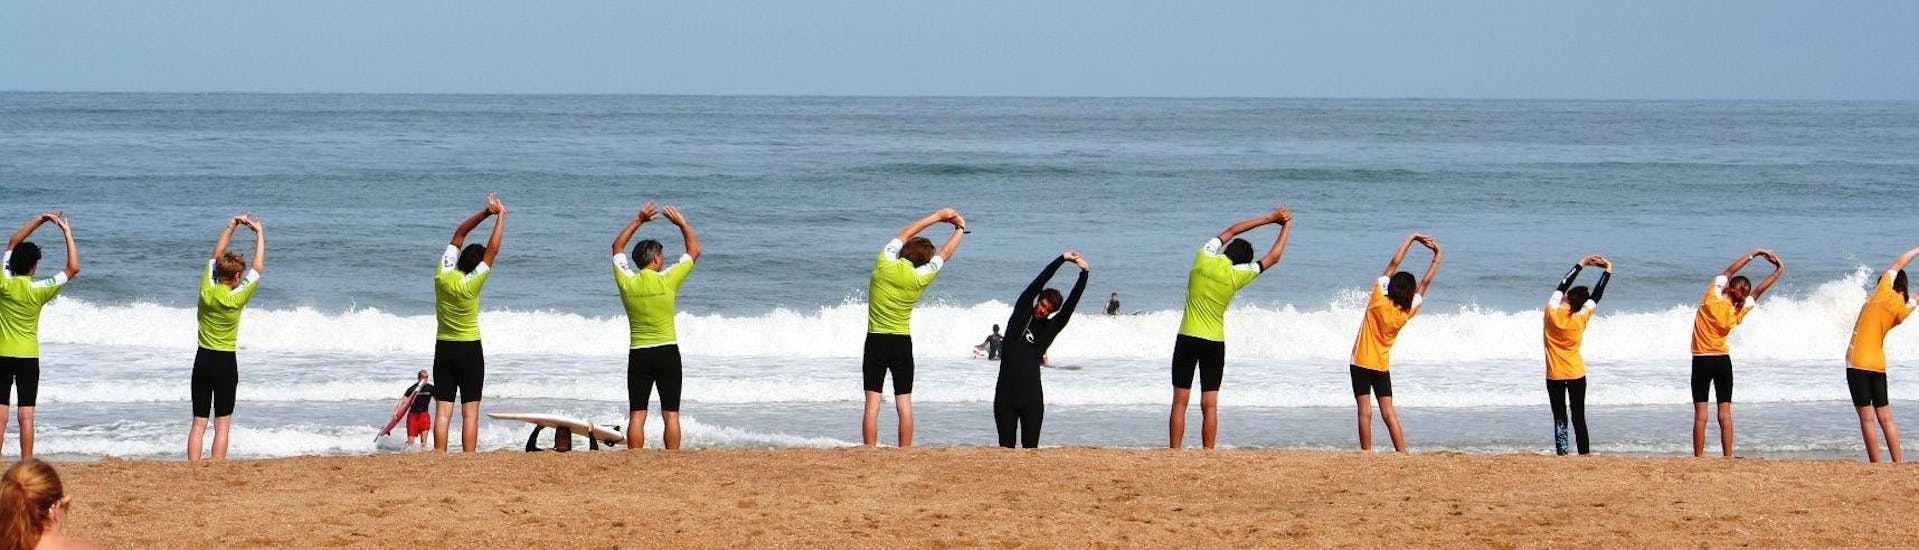 Surfers are warming up on the beach before the start of their Group Surfing Lessons "À la carte" on the Marinella Beach in Anglet with the surf school Le Club de la Glisse.